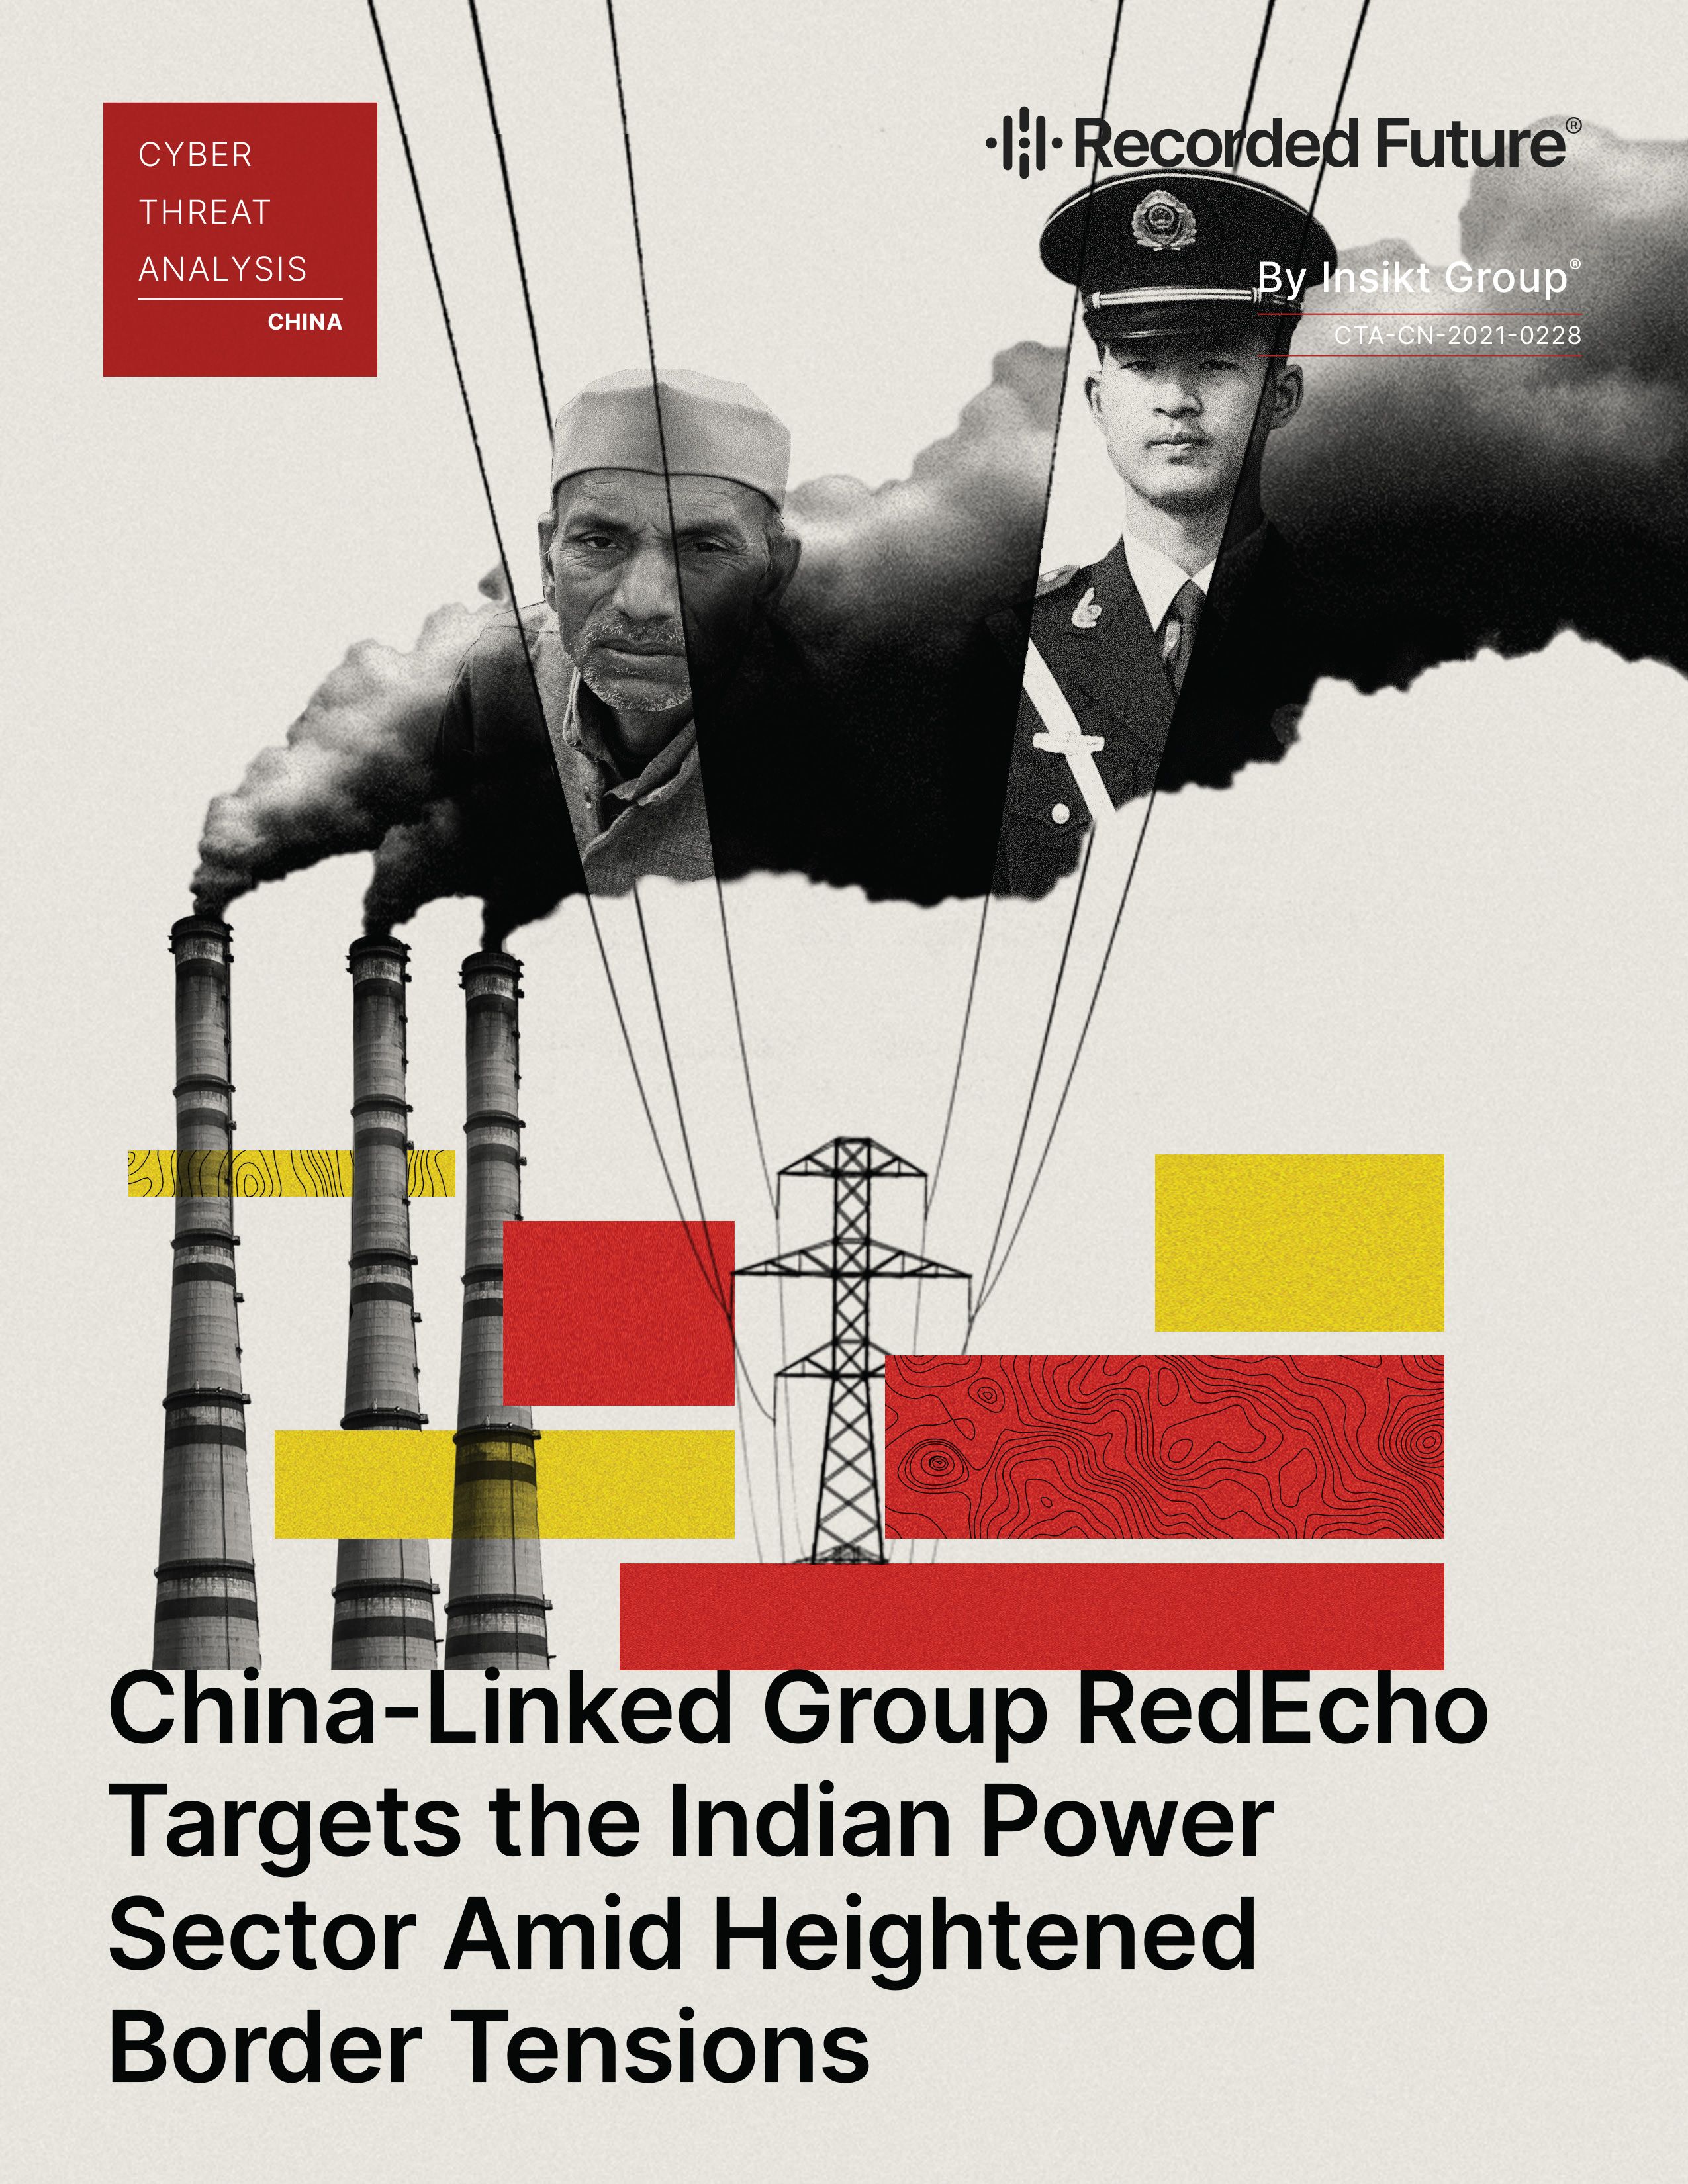 China-Linked Group RedEcho Targets the Indian Power Sector Amid Heightened Border Tensions